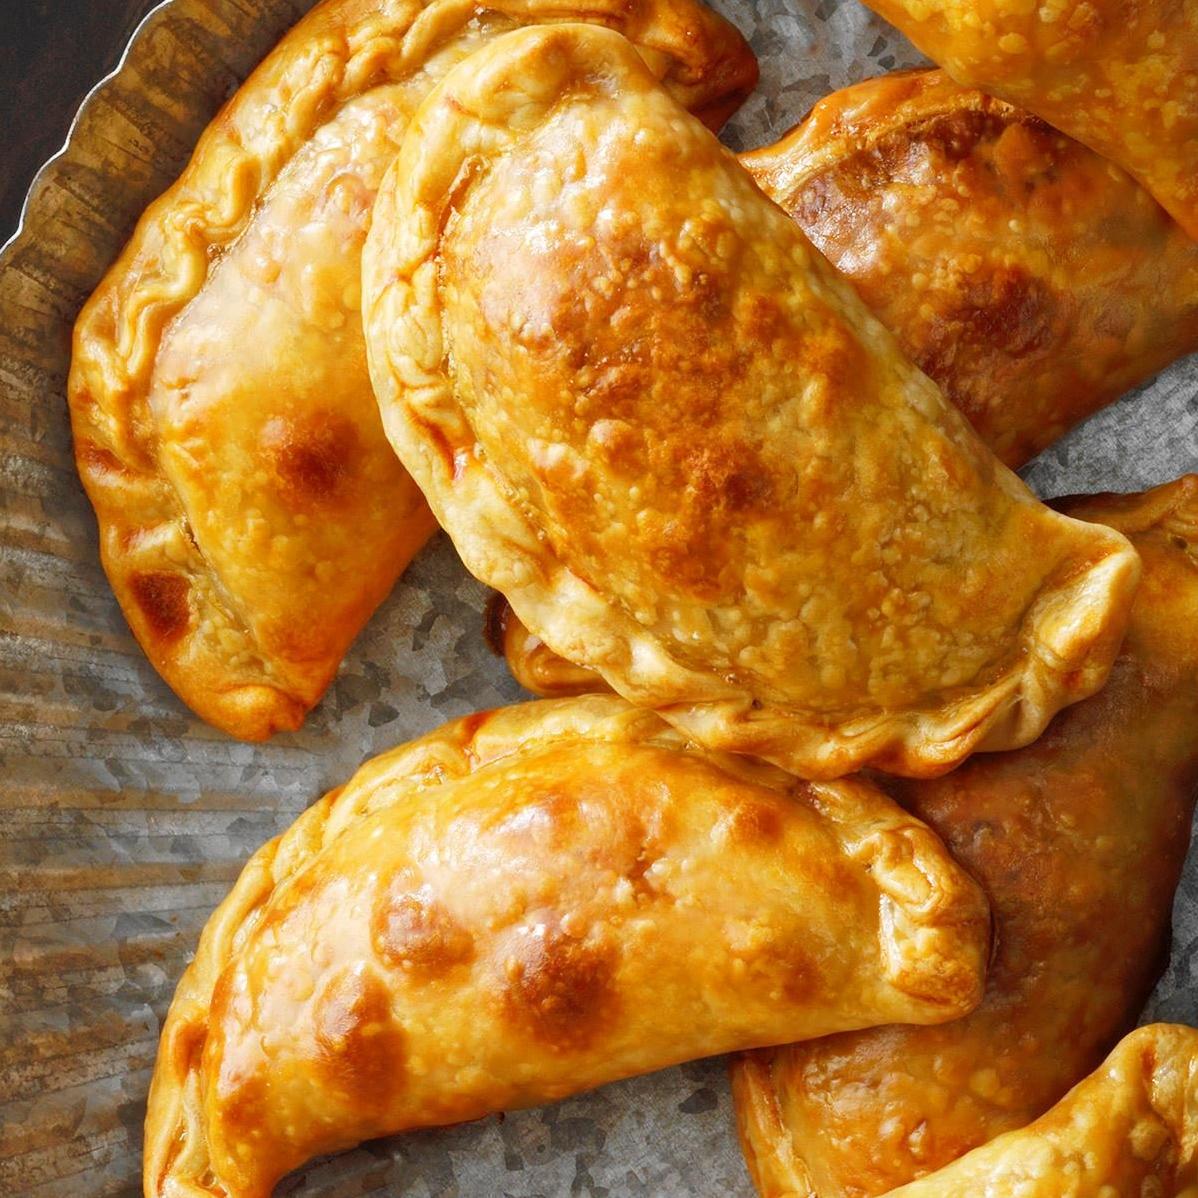  The empanadas are crispy on the outside, and juicy on the inside.